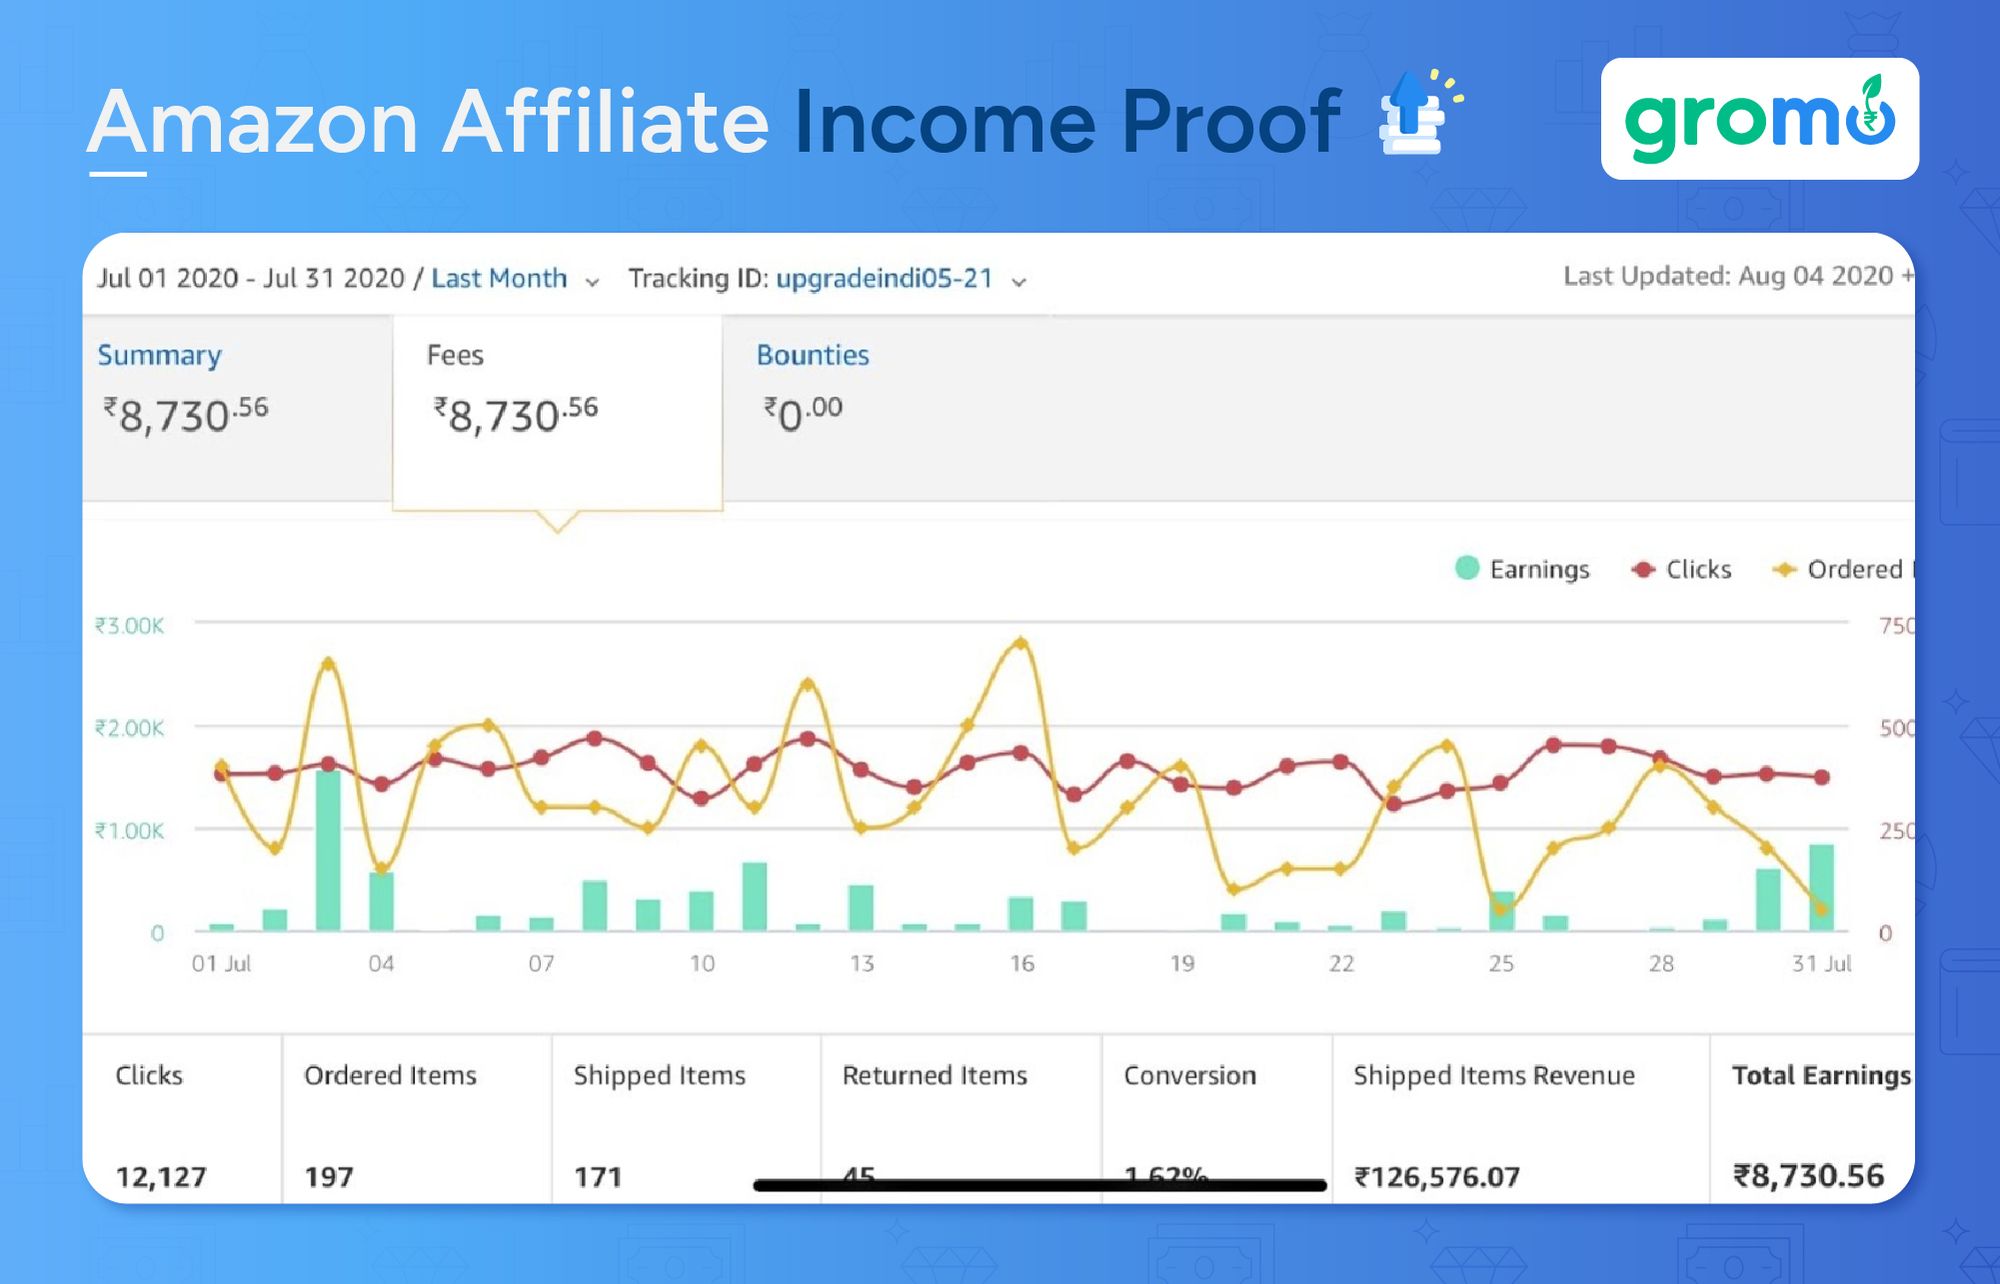 Amazon Affiliate Income Proof - Best Ways to Make Money Online - GroMo